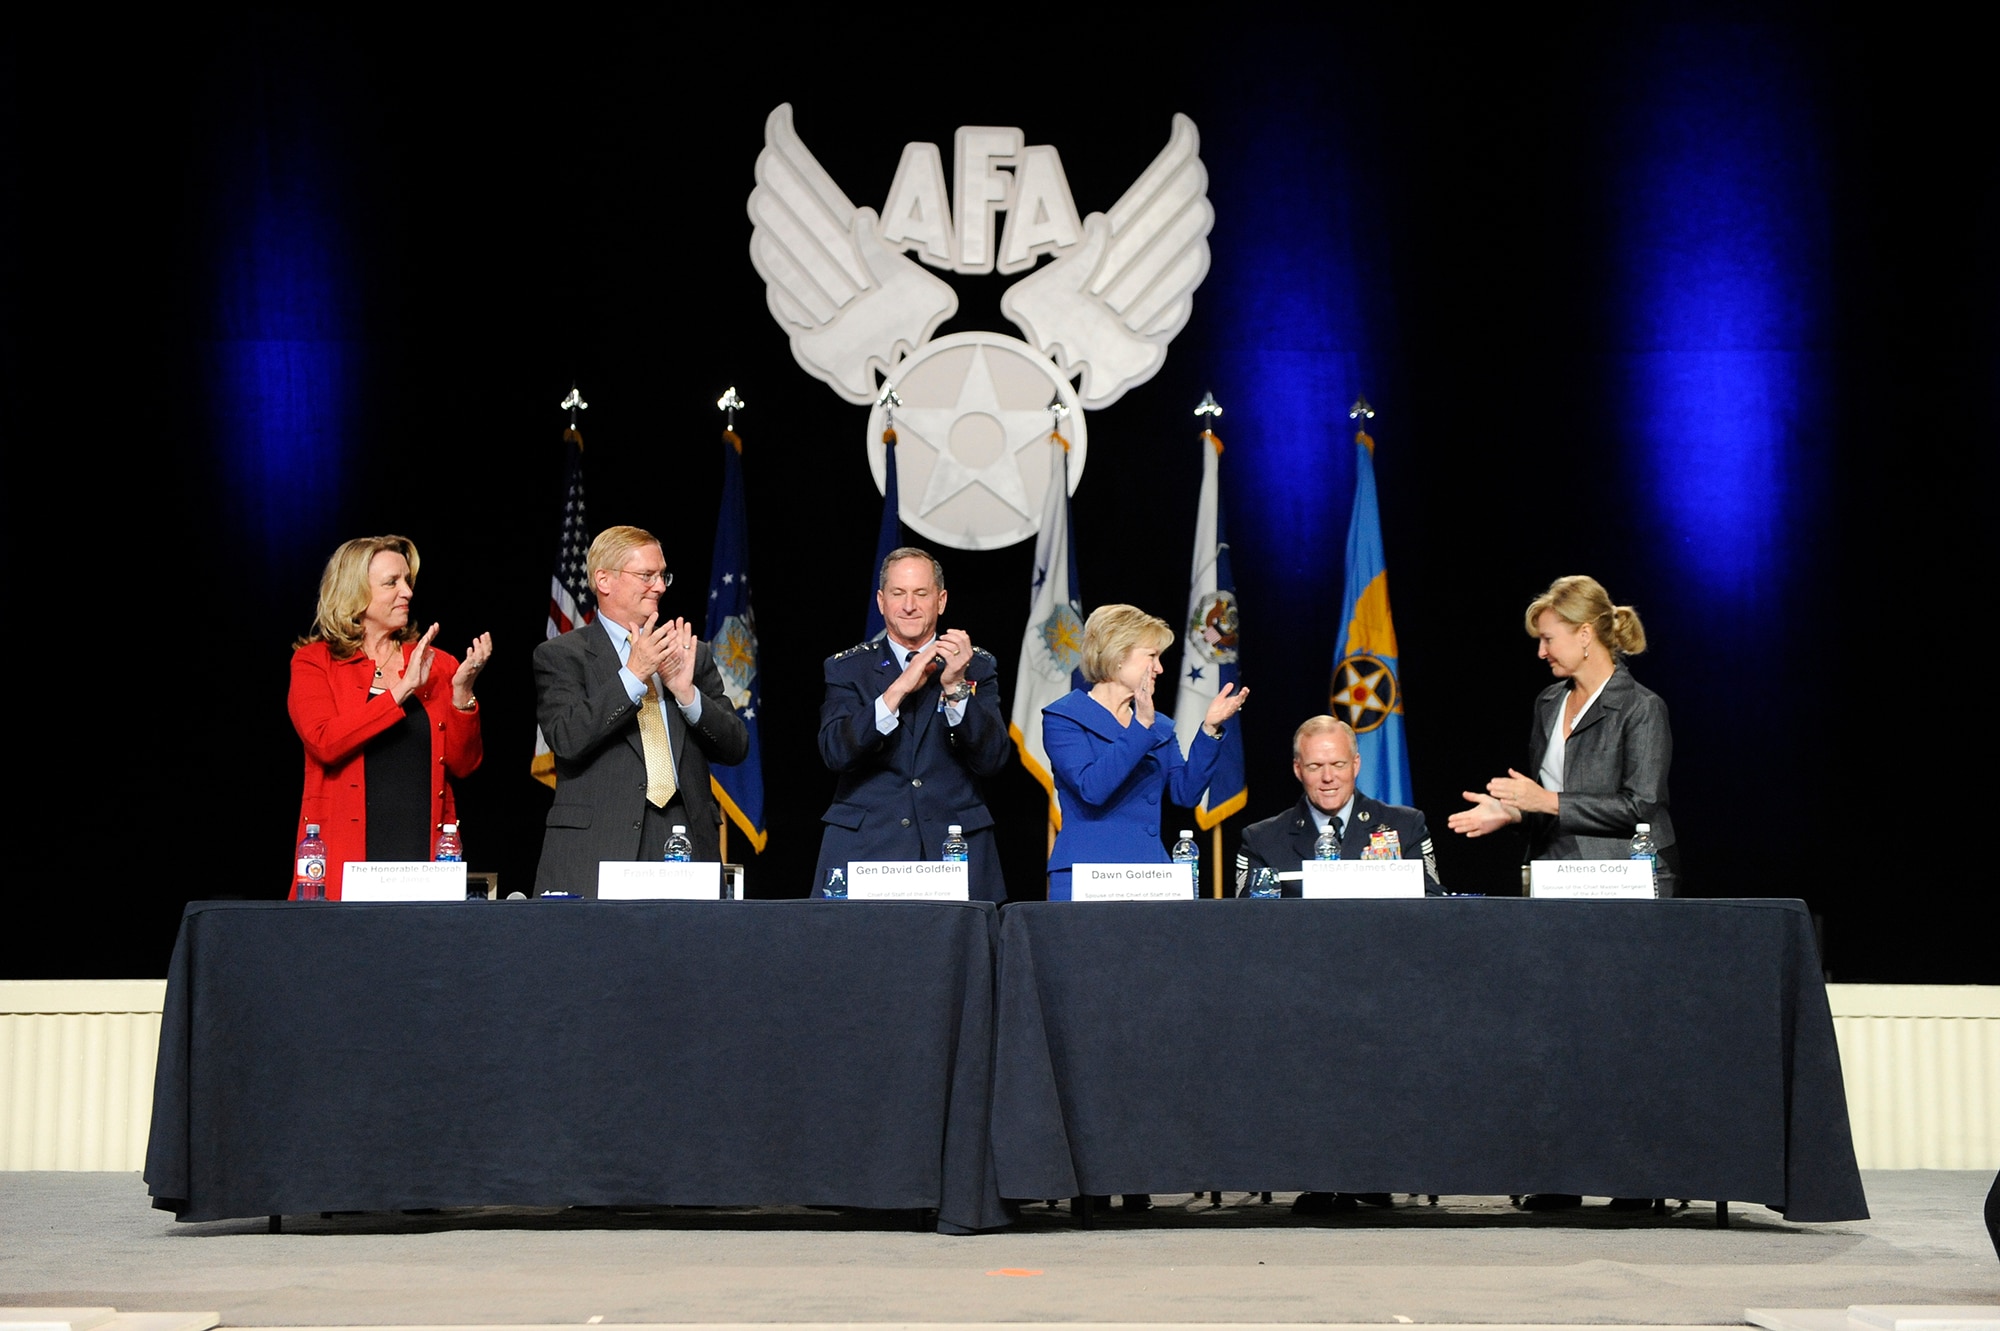 Senior leadership and spouses congratulate Chief Master Sgt. of the Air Force James A. Cody for his service during a town hall session at the Air Force Association's Air, Space and Cyber Conference in National Harbor, Md., Sept. 19, 2016. (U.S. Air Force photo/Andy Morataya)             